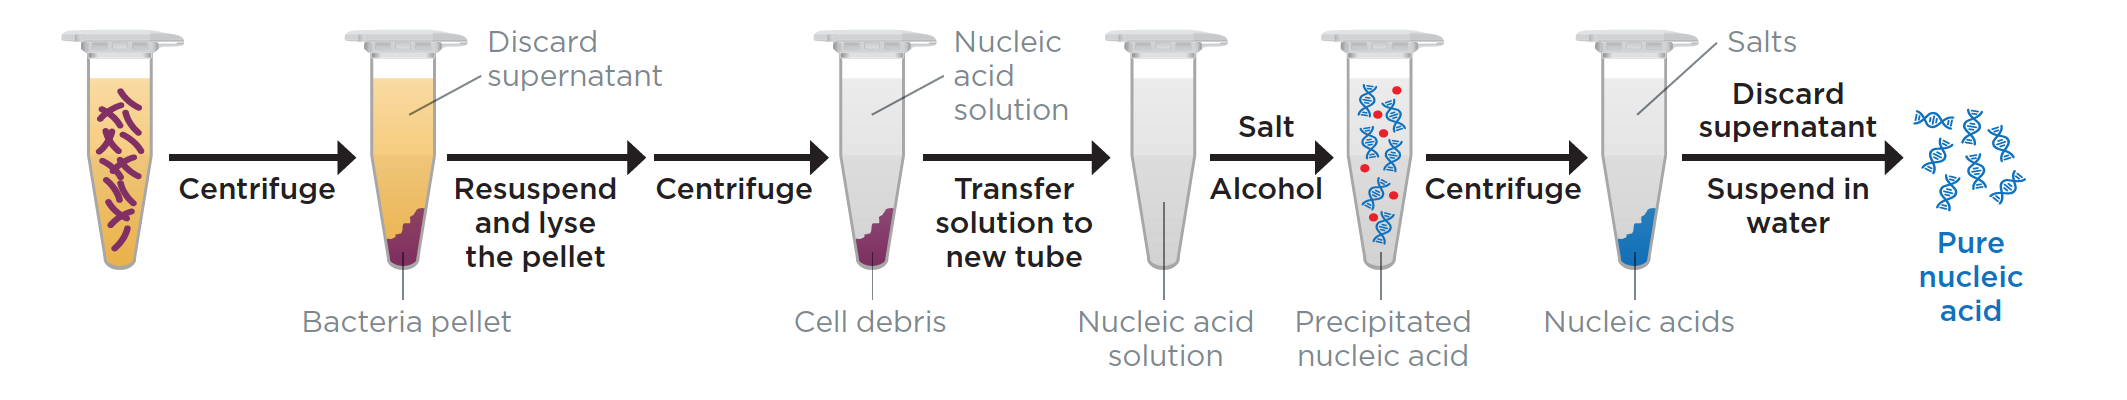 Figure 1: Schematic overview of an isopropanol precipitation of nucleic acids